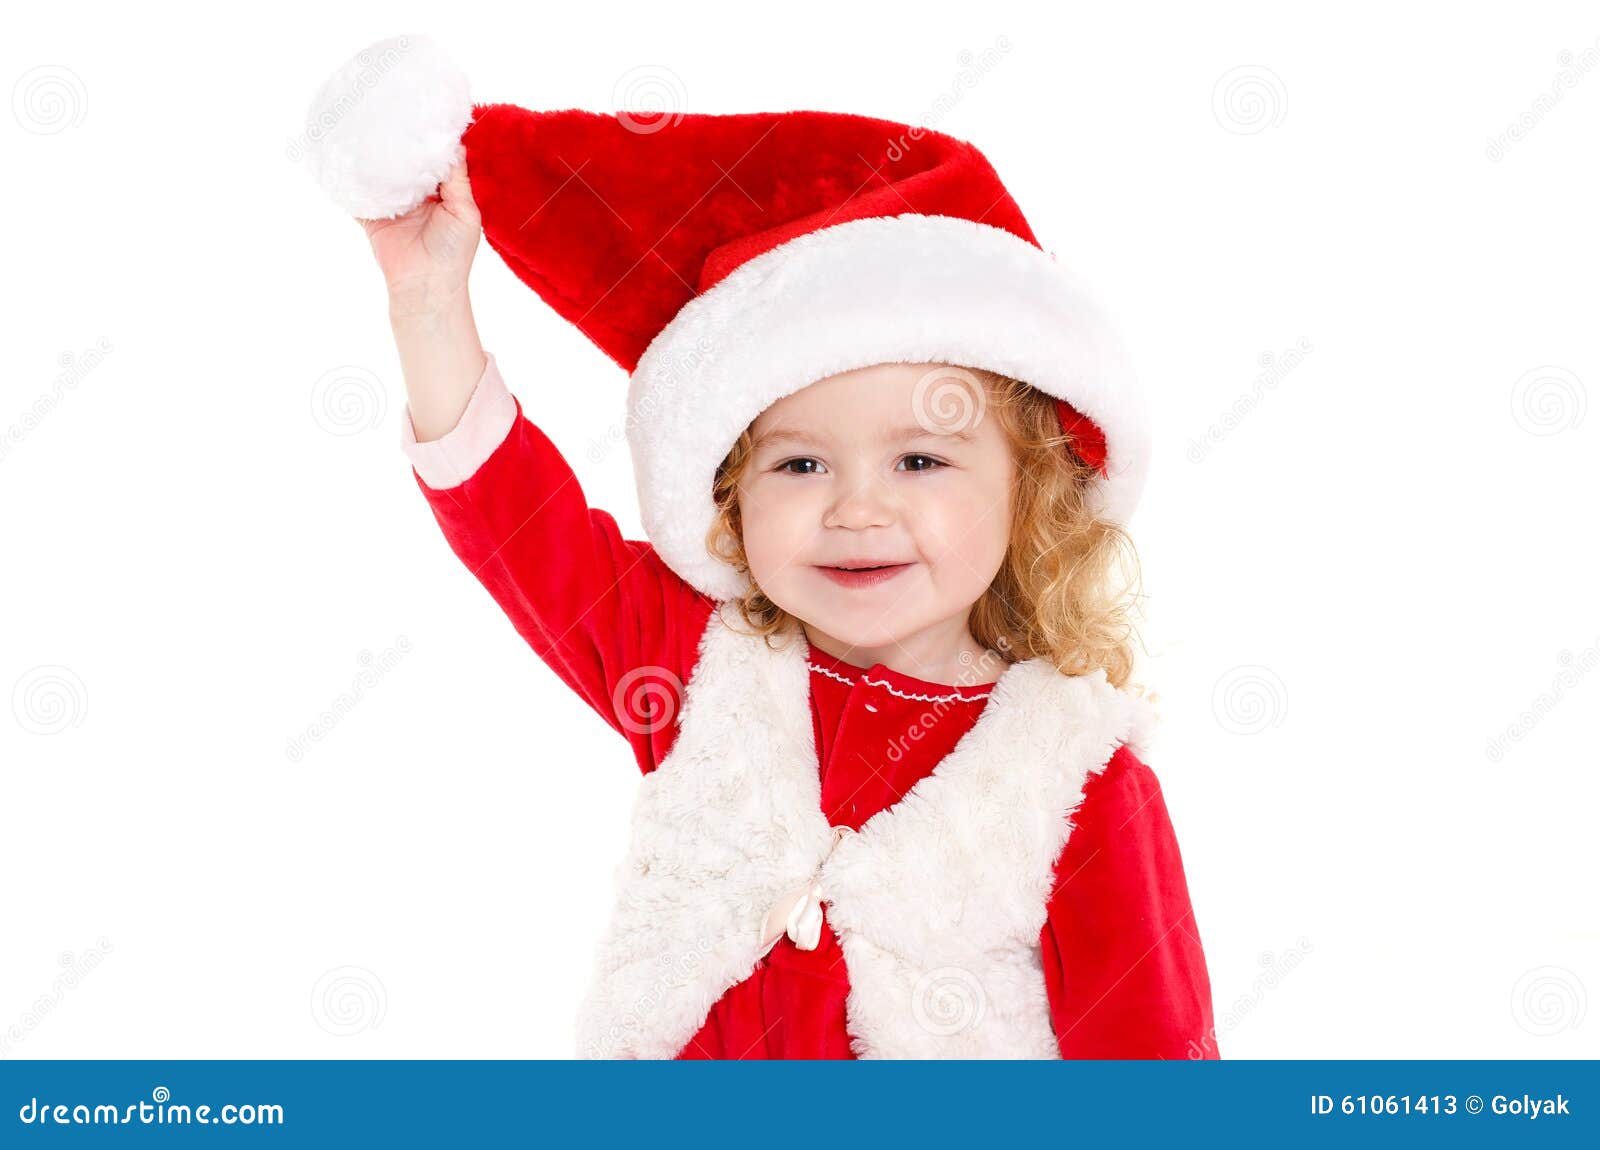 Little Girl Dressed As Santa Claus. Stock Image - Image of beauty, face ...